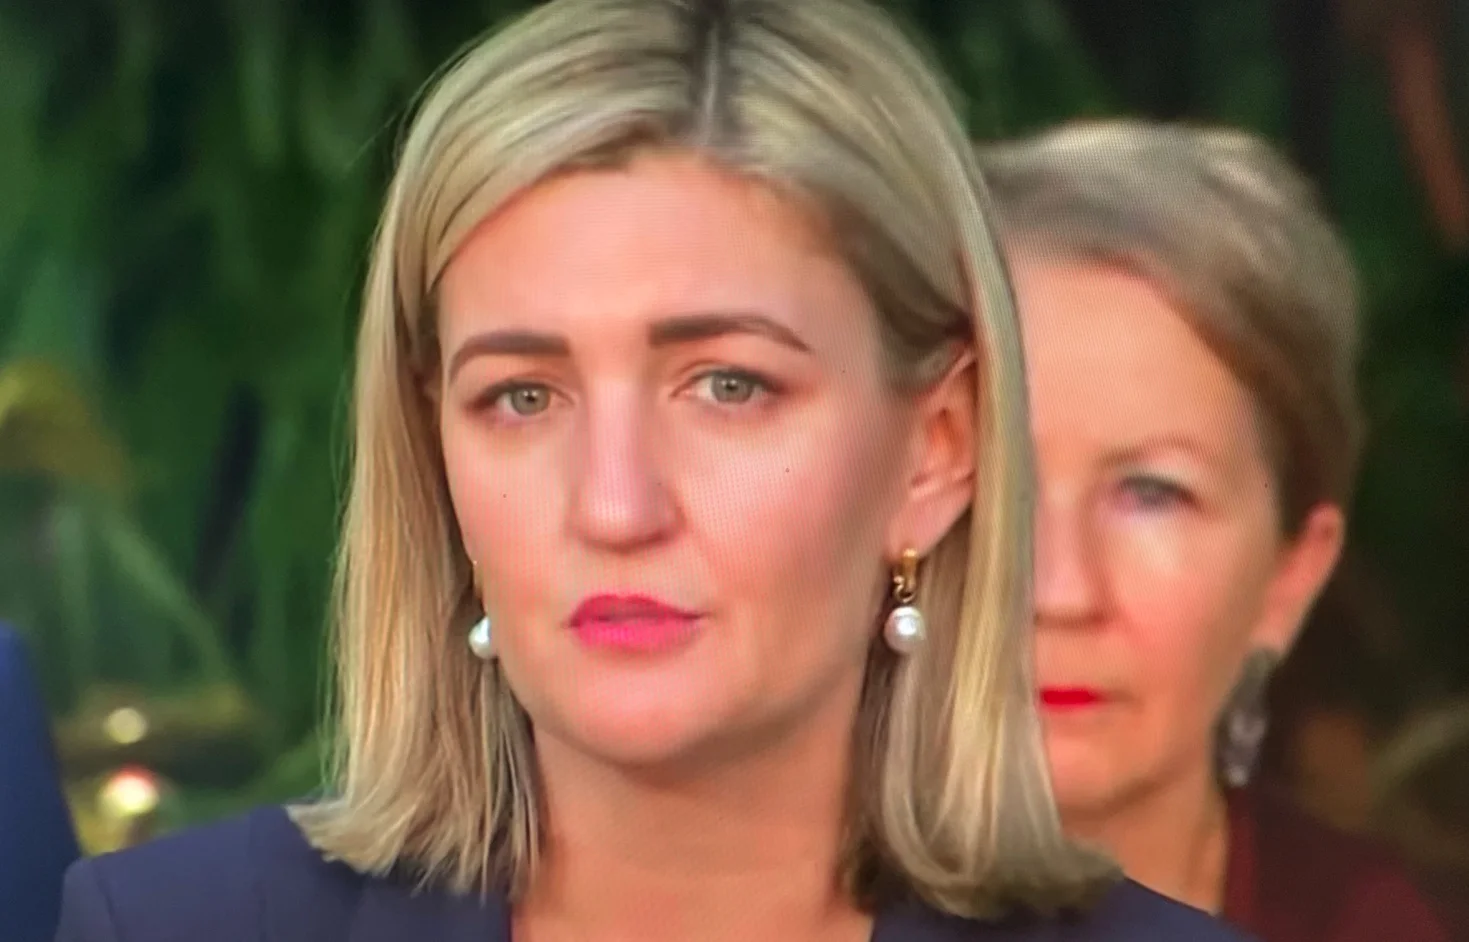 Queensland's new Health Minister, Shannon Fentiman, speaking to media shortly after her appointment. Screenshot from Sky News.